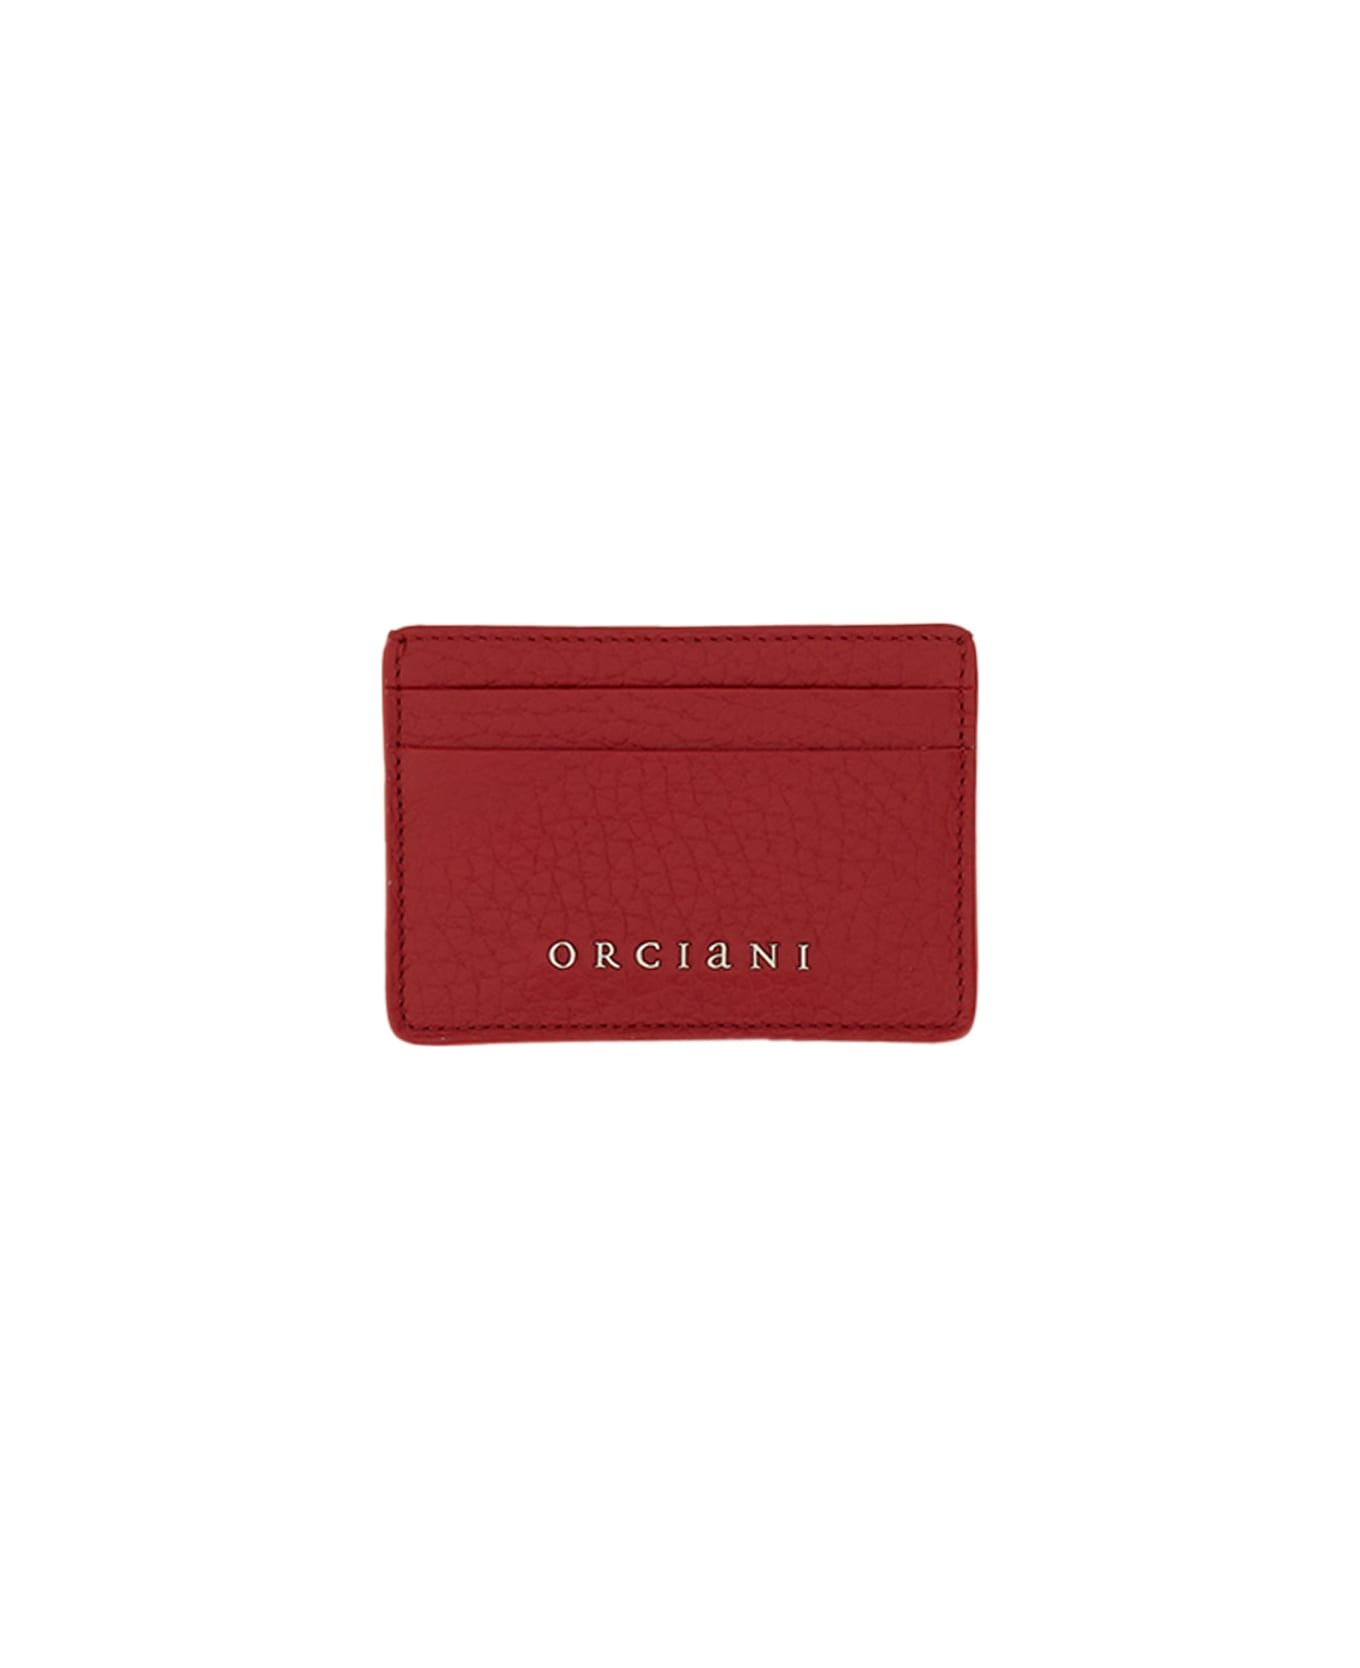 Orciani Soft Card Holder - RED 財布